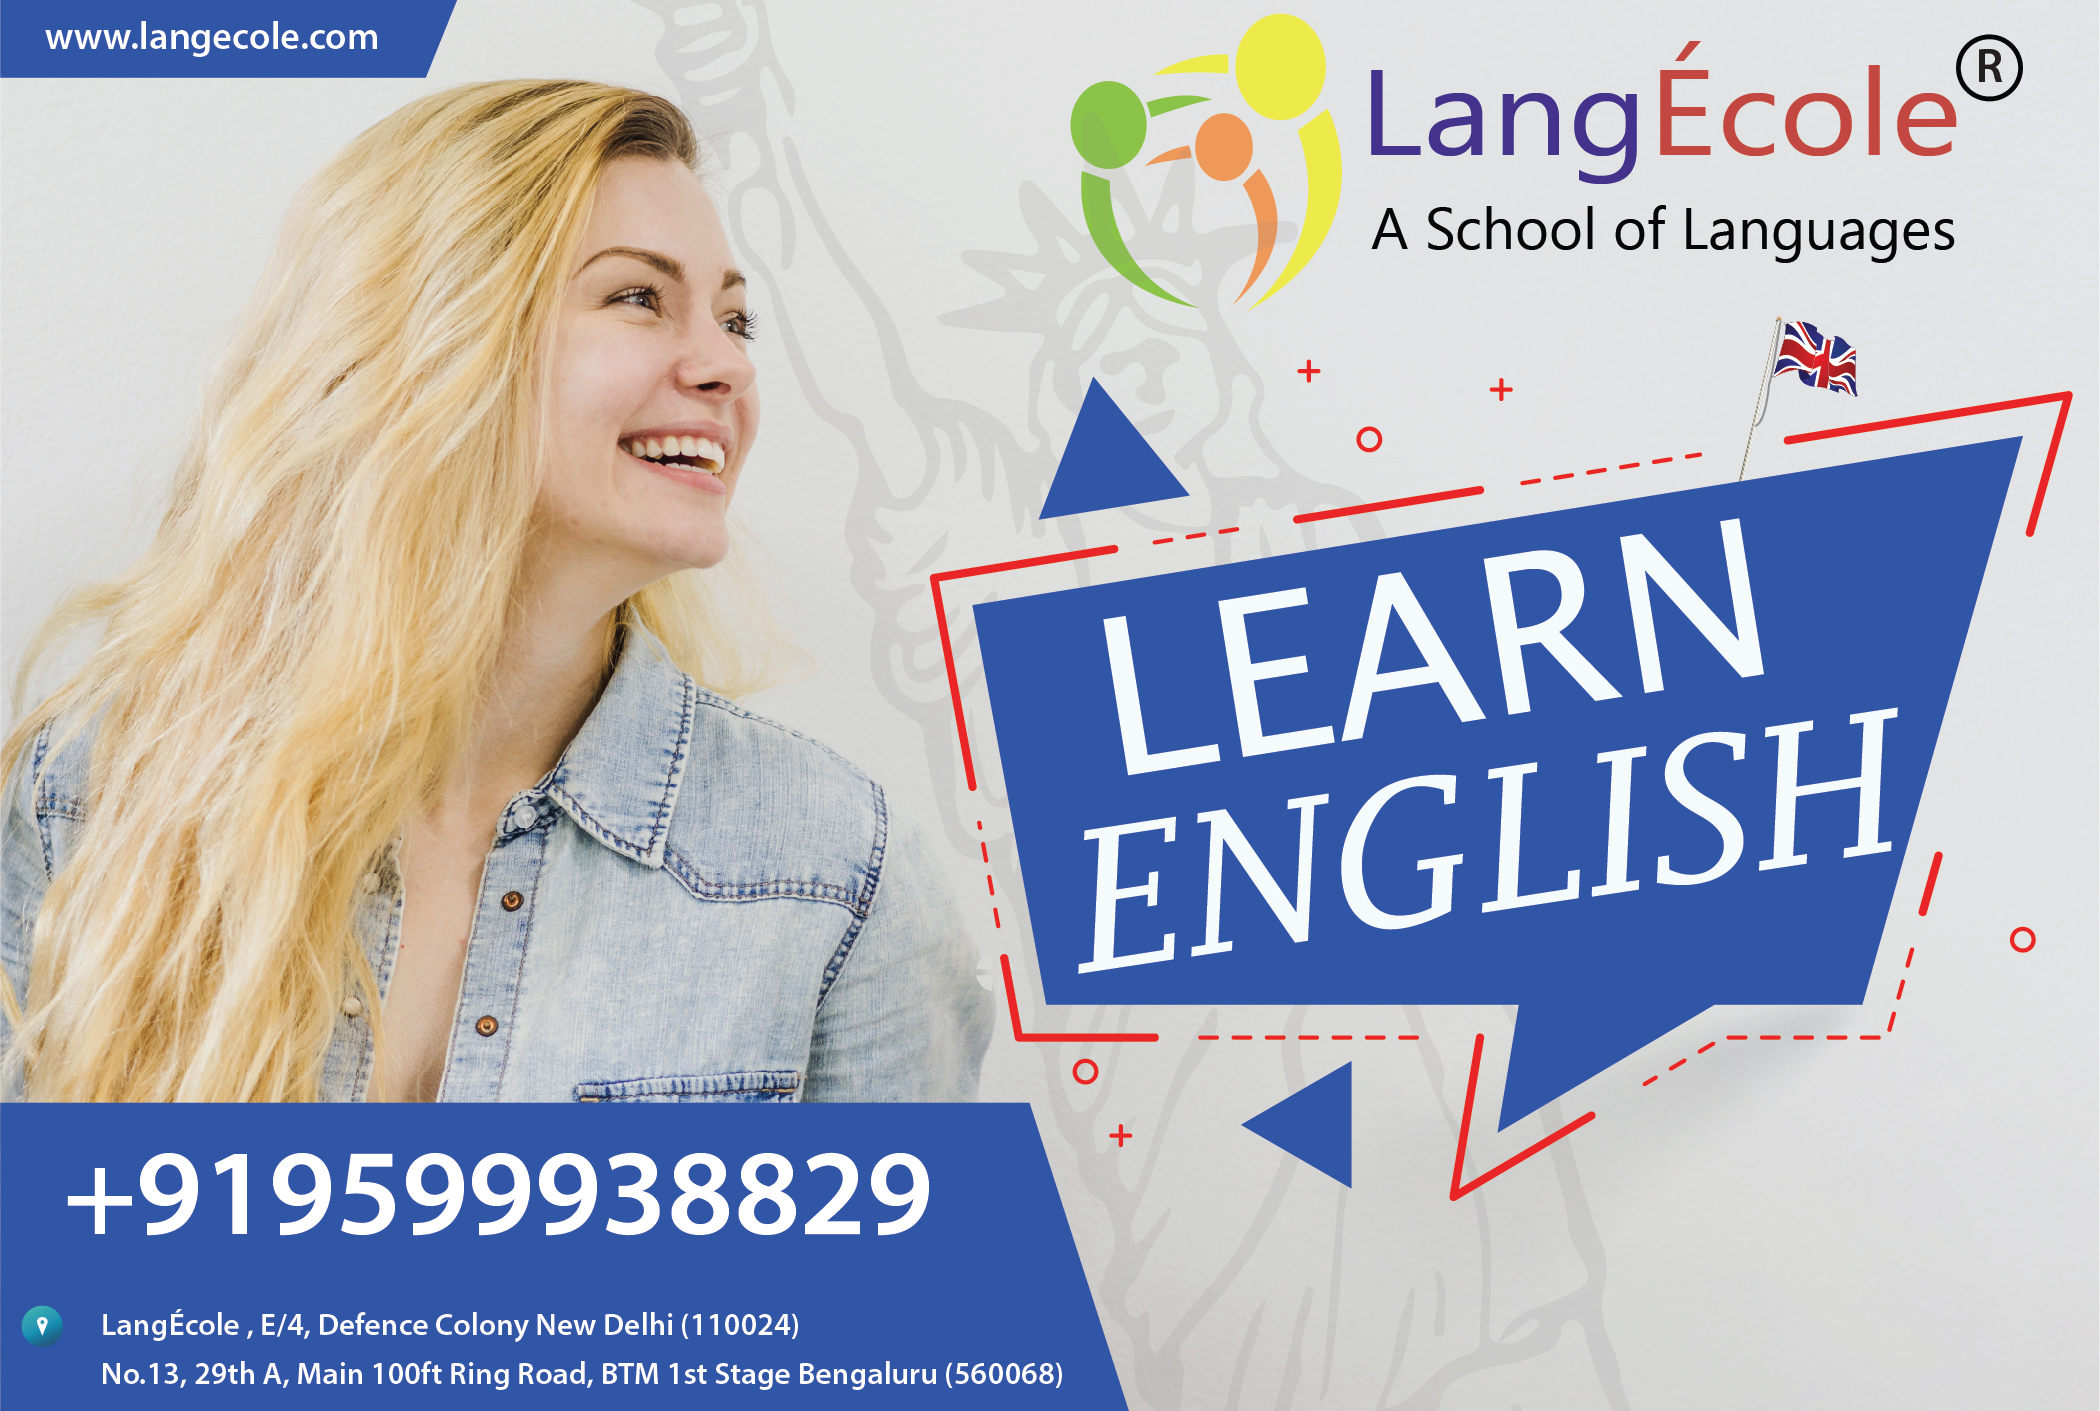 Learn English at LangÉcole, New Delhi